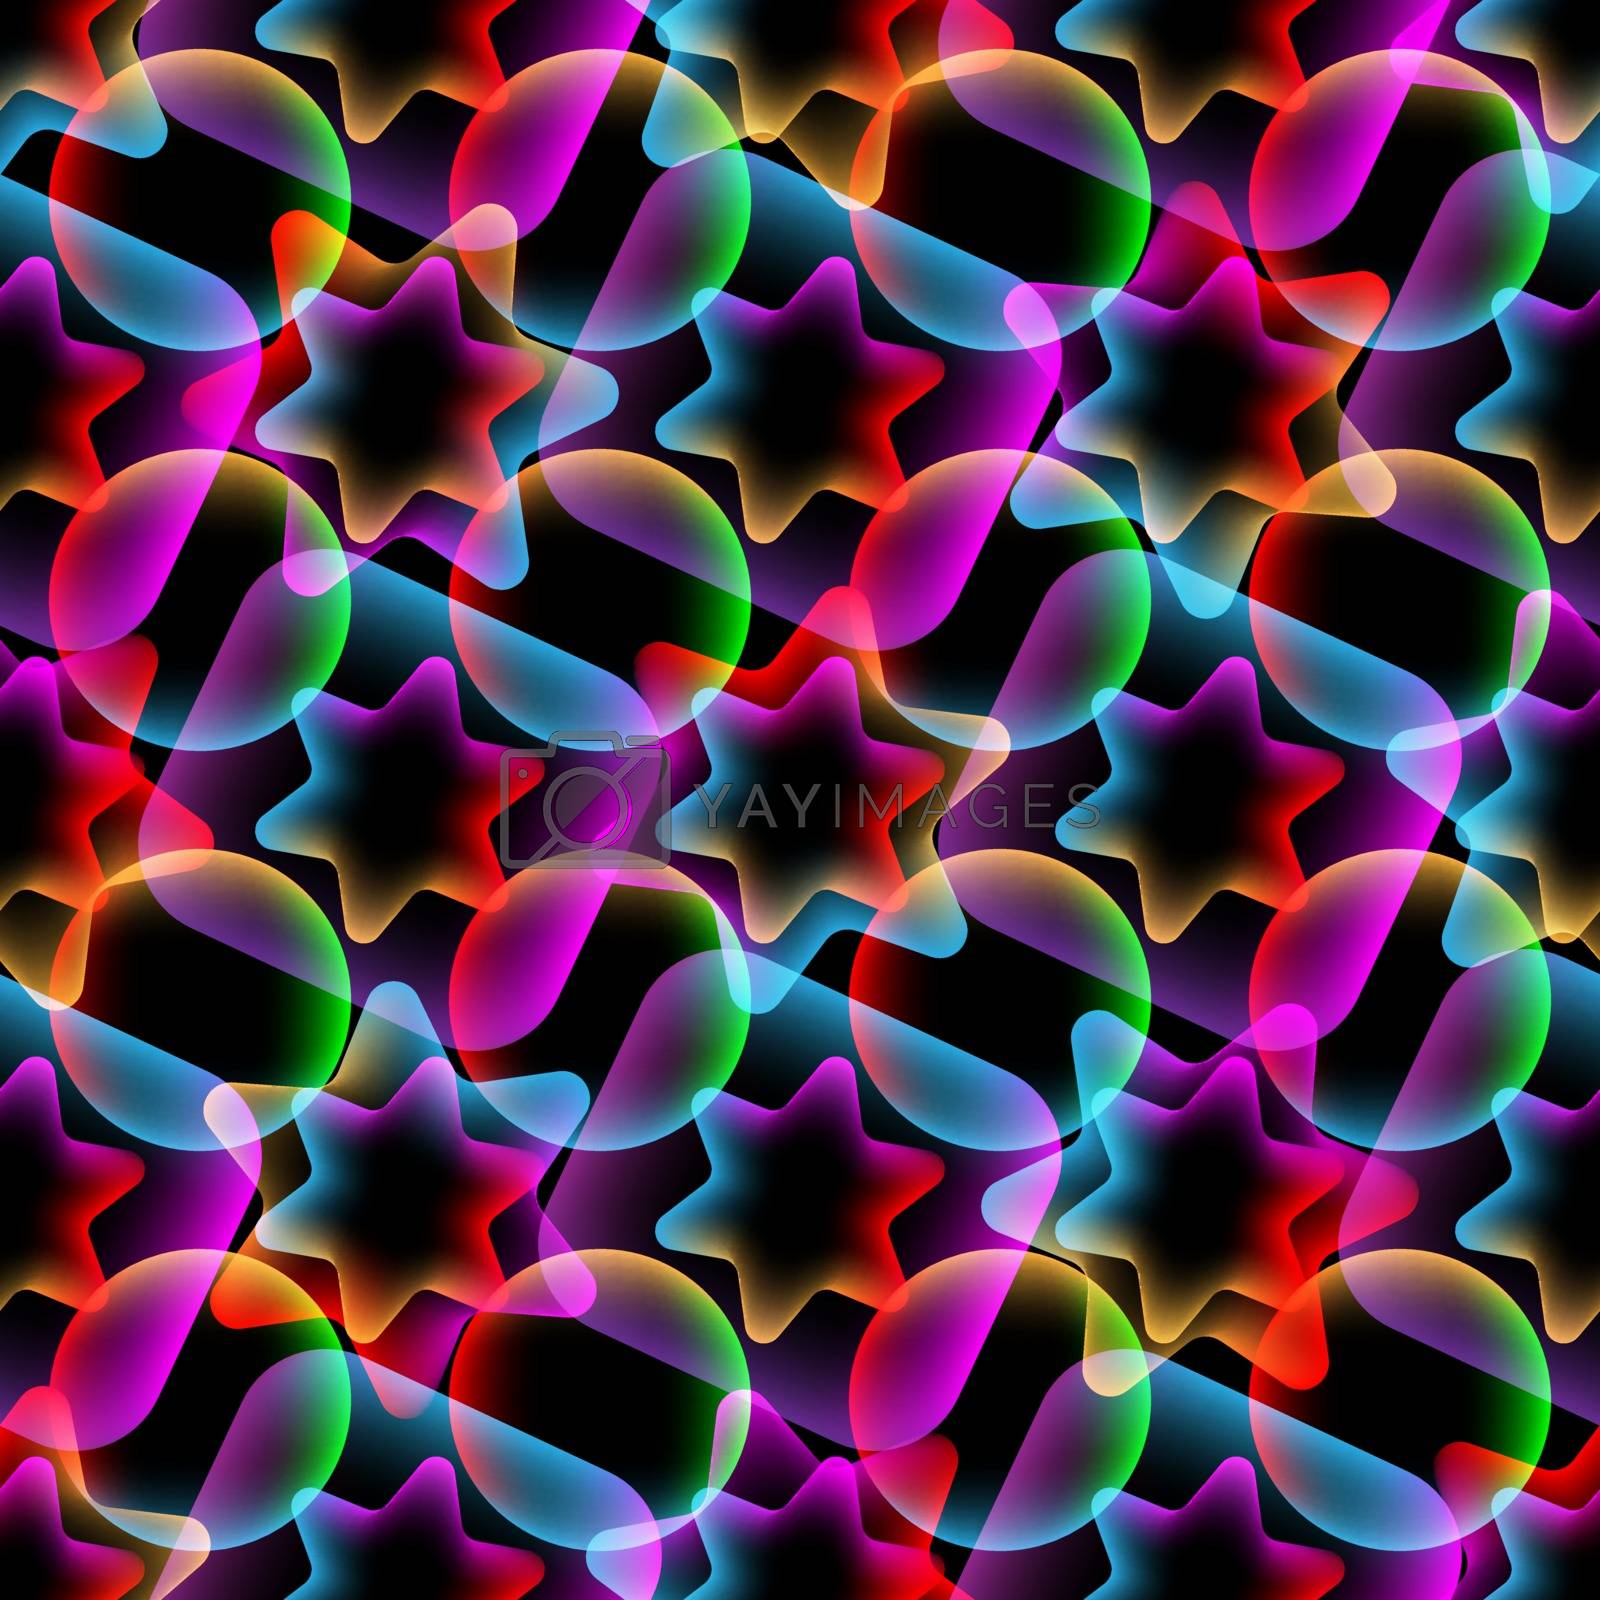 Royalty free image of Seamless pattern Abstract liquid lava lamp from geometric shapes by Musjaka